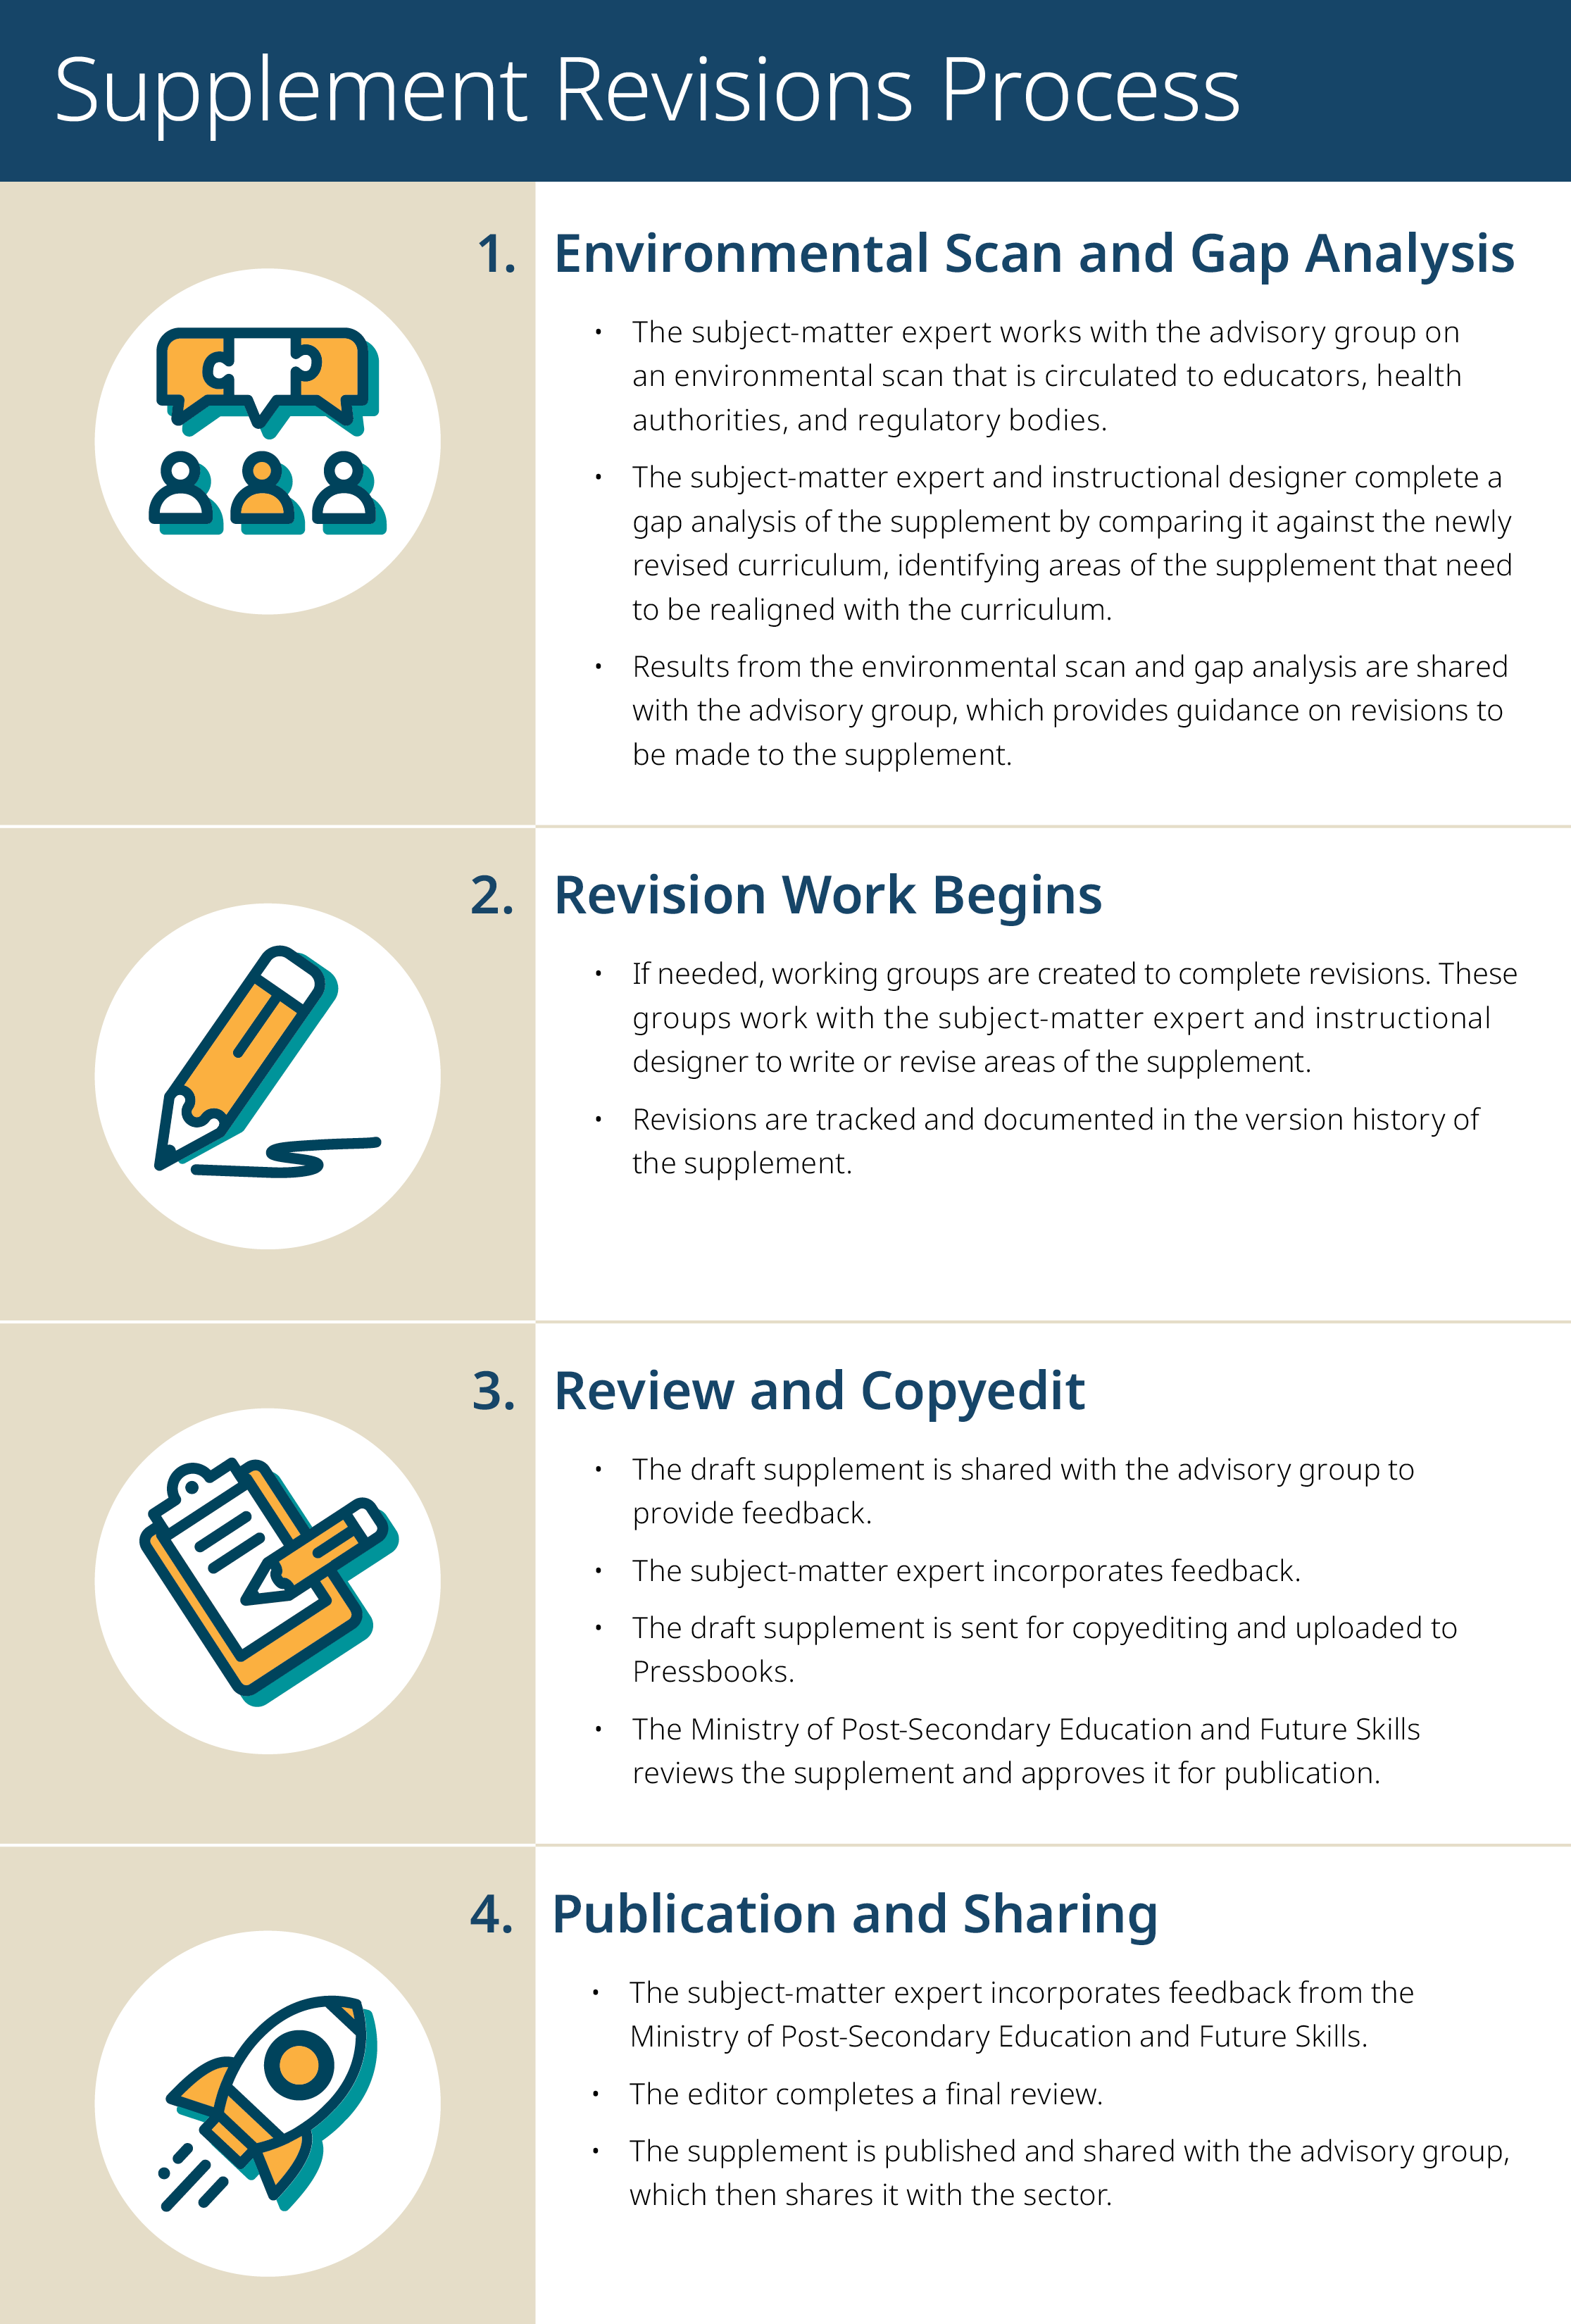 The graphic provides a high-level description of the process for the HCA supplement revision project. Steps include: 1. Environmental Scan and Gap Analysis. 2. Revision Work Begins. 3. Review and Copyedit. 4. Publication and Sharing. 